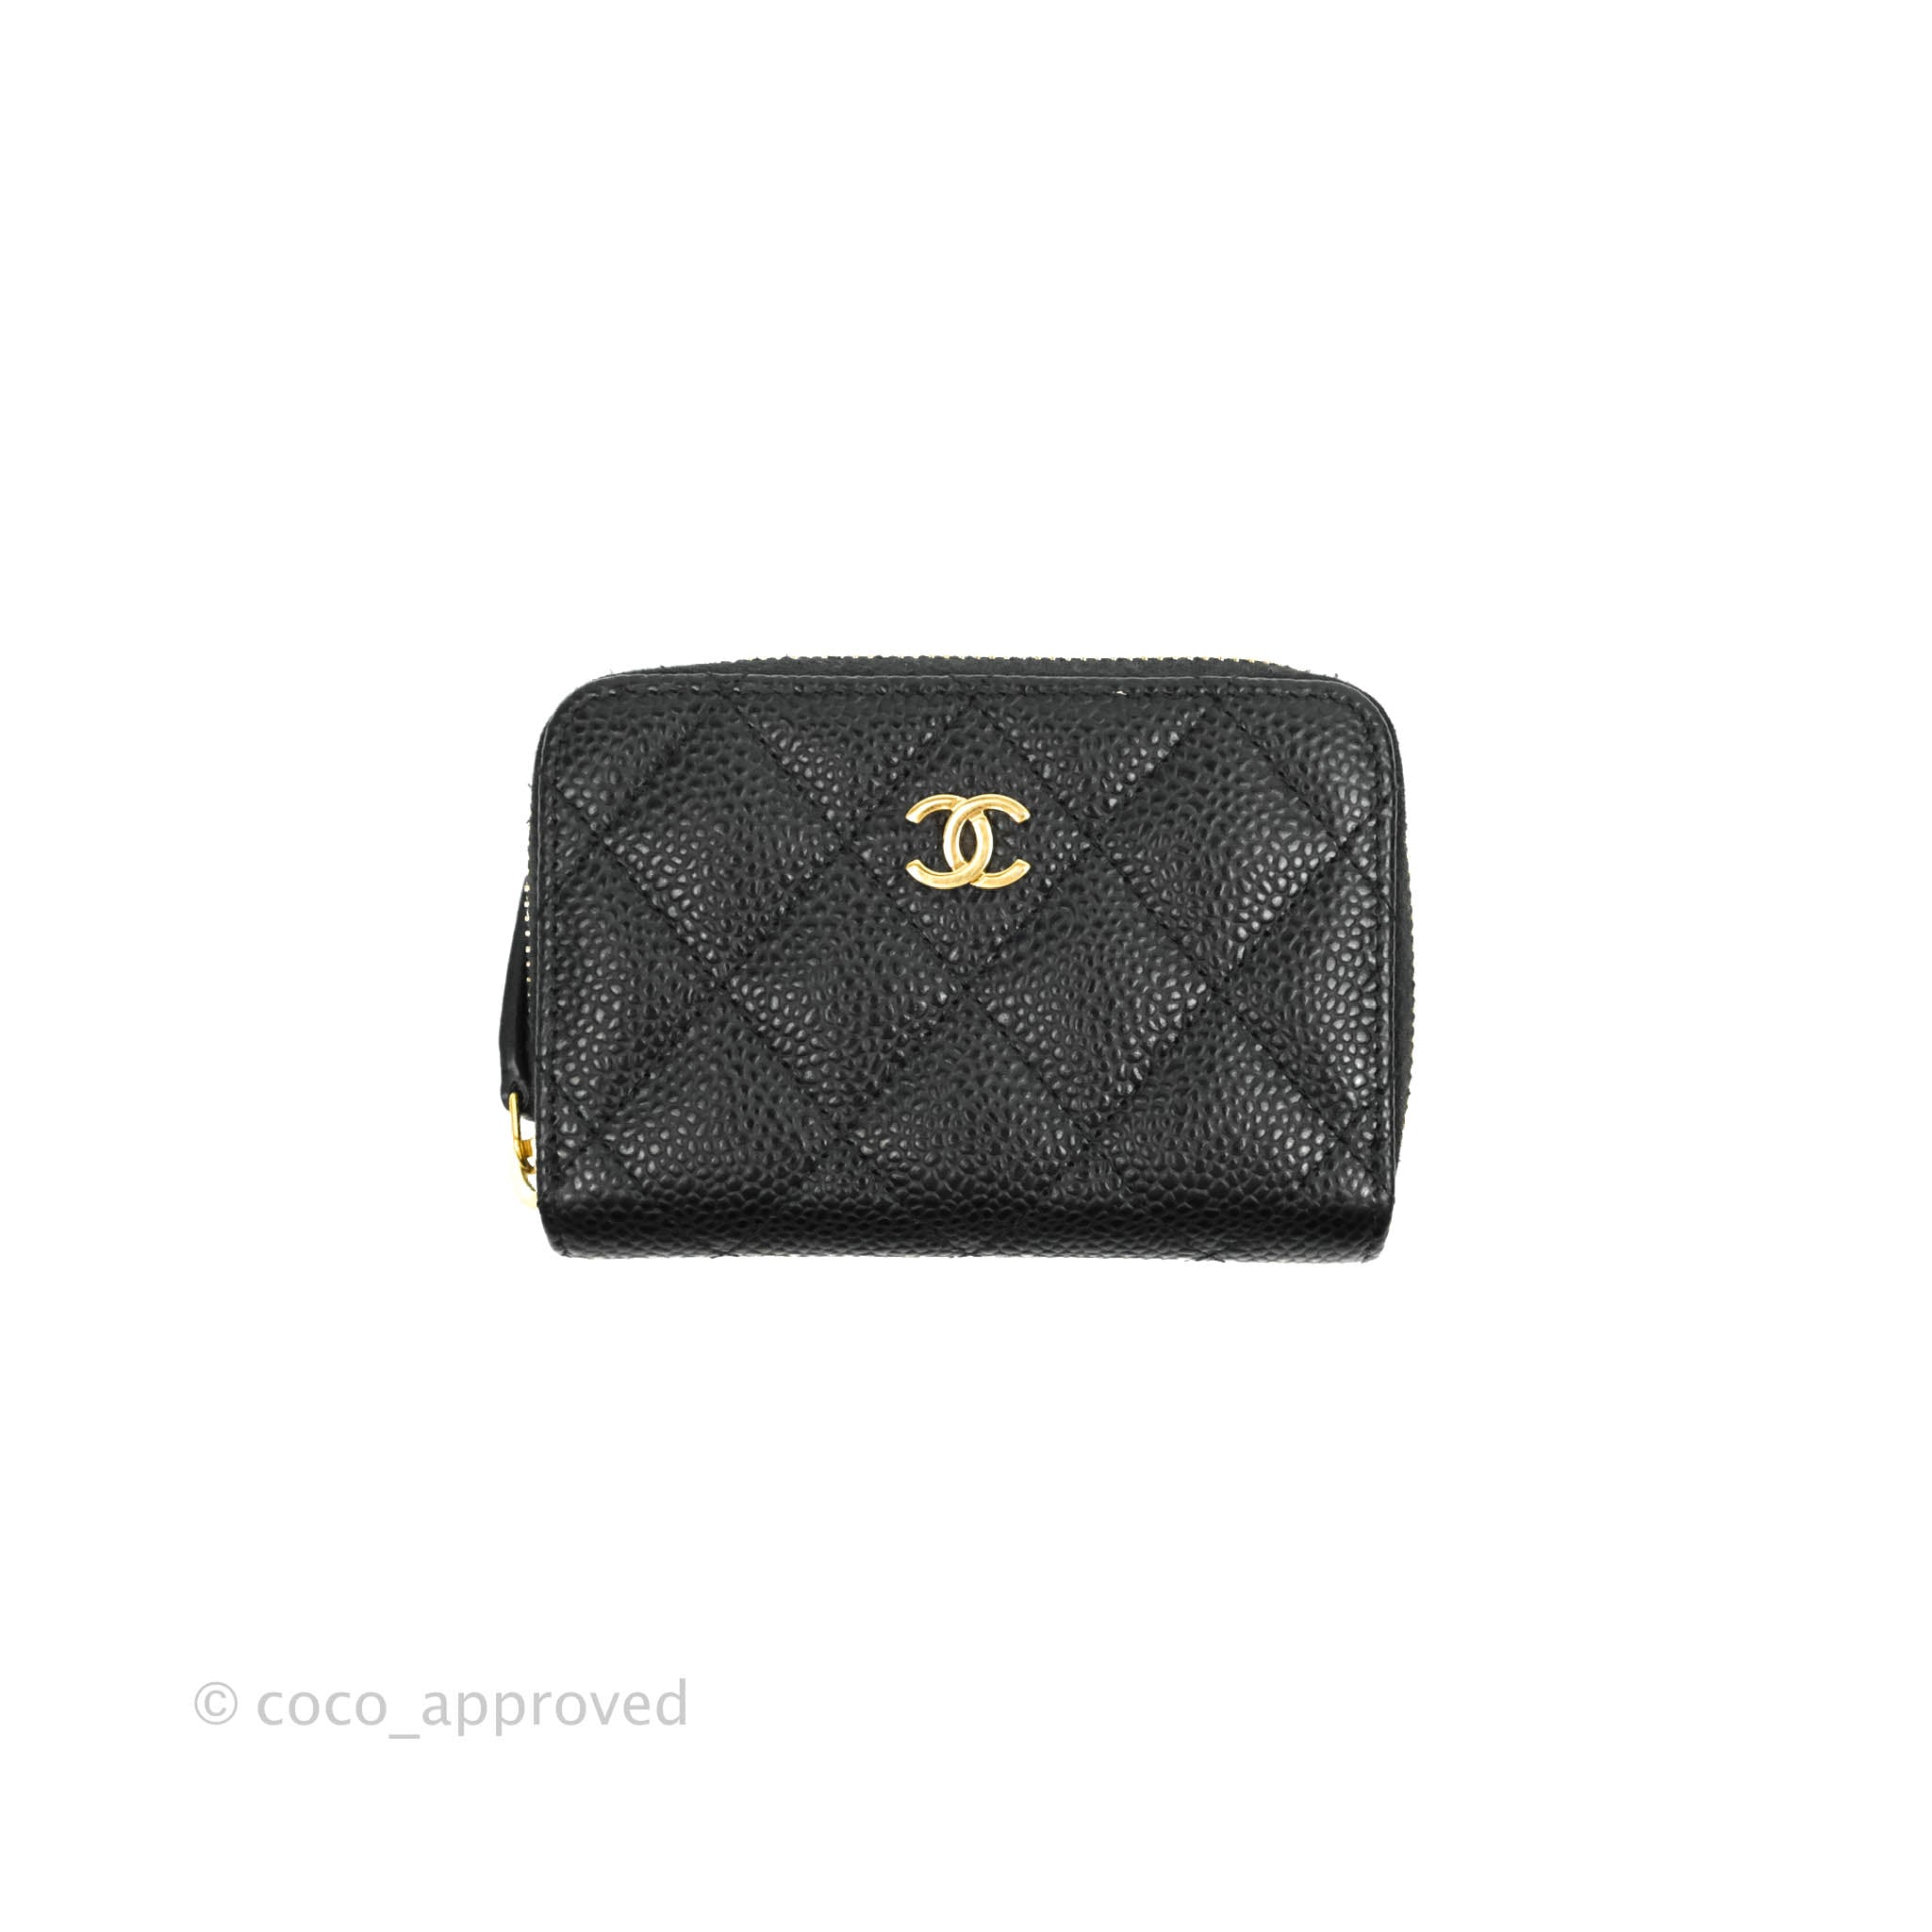 AUTHENTIC Chanel Classic Zipped Coin Purse